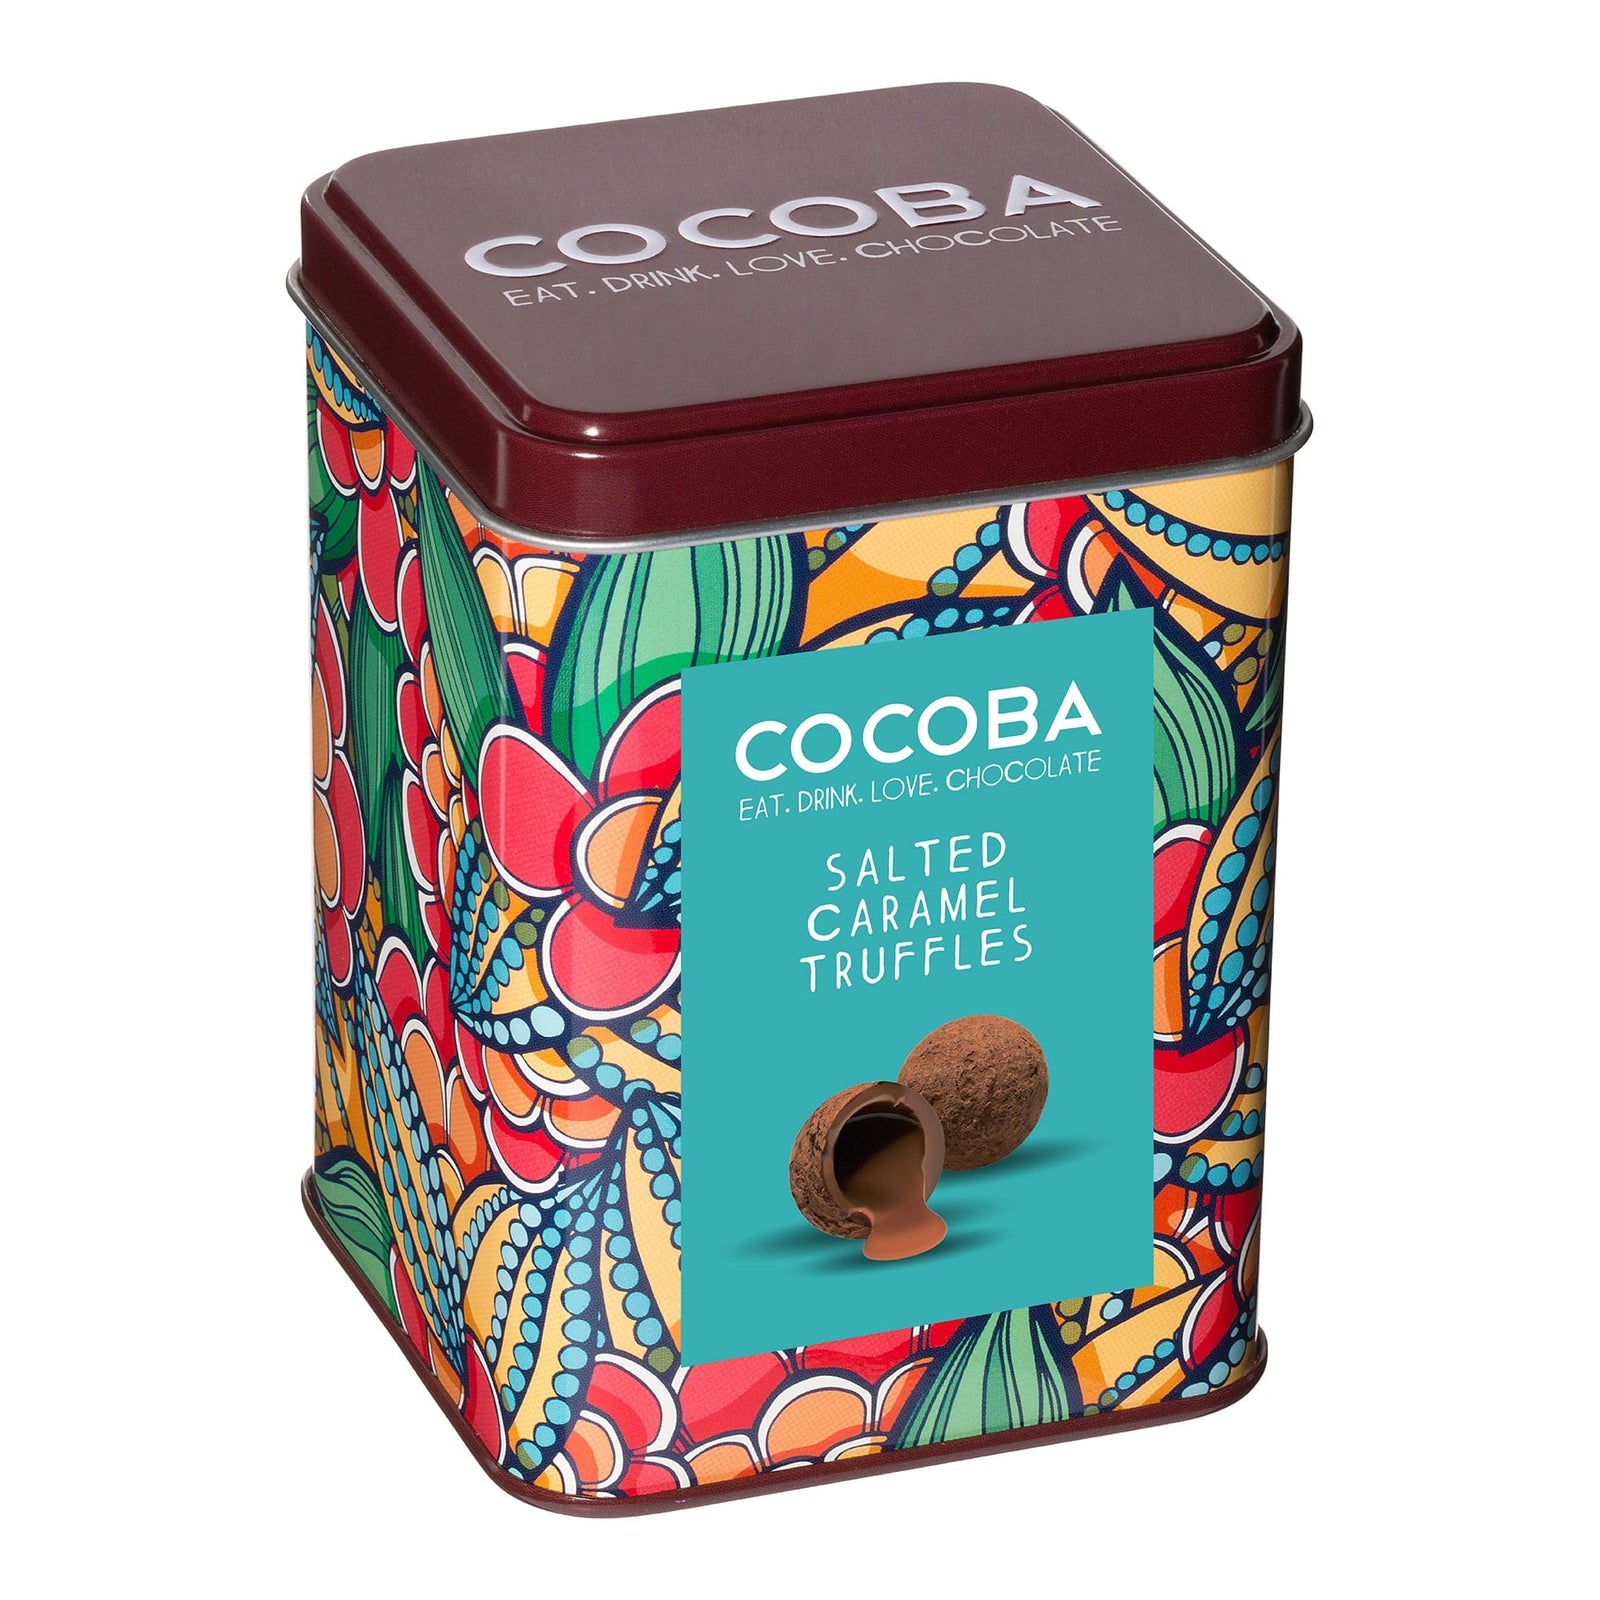 Cocoba Salted Caramel Truffles Gift Tin 120g